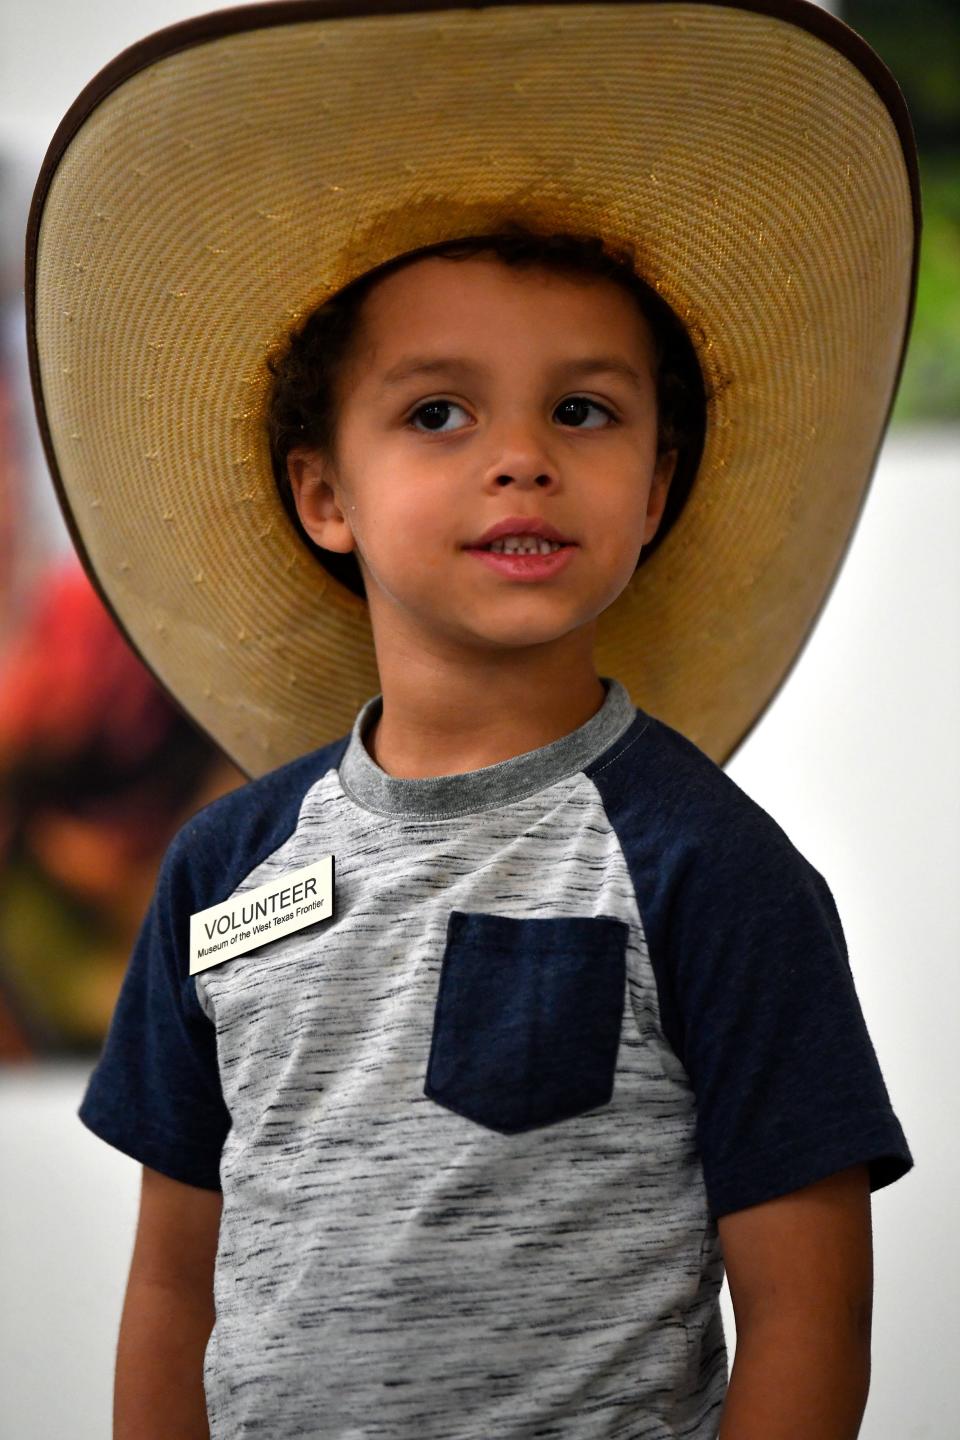 Roman Lee, 5, who helped out at the Museum of the West Texas Frontier is also the demographic for whom the institution's recent cotton program was created. Teaching children about the reach of agriculture is a central focus for the Stamford museum.